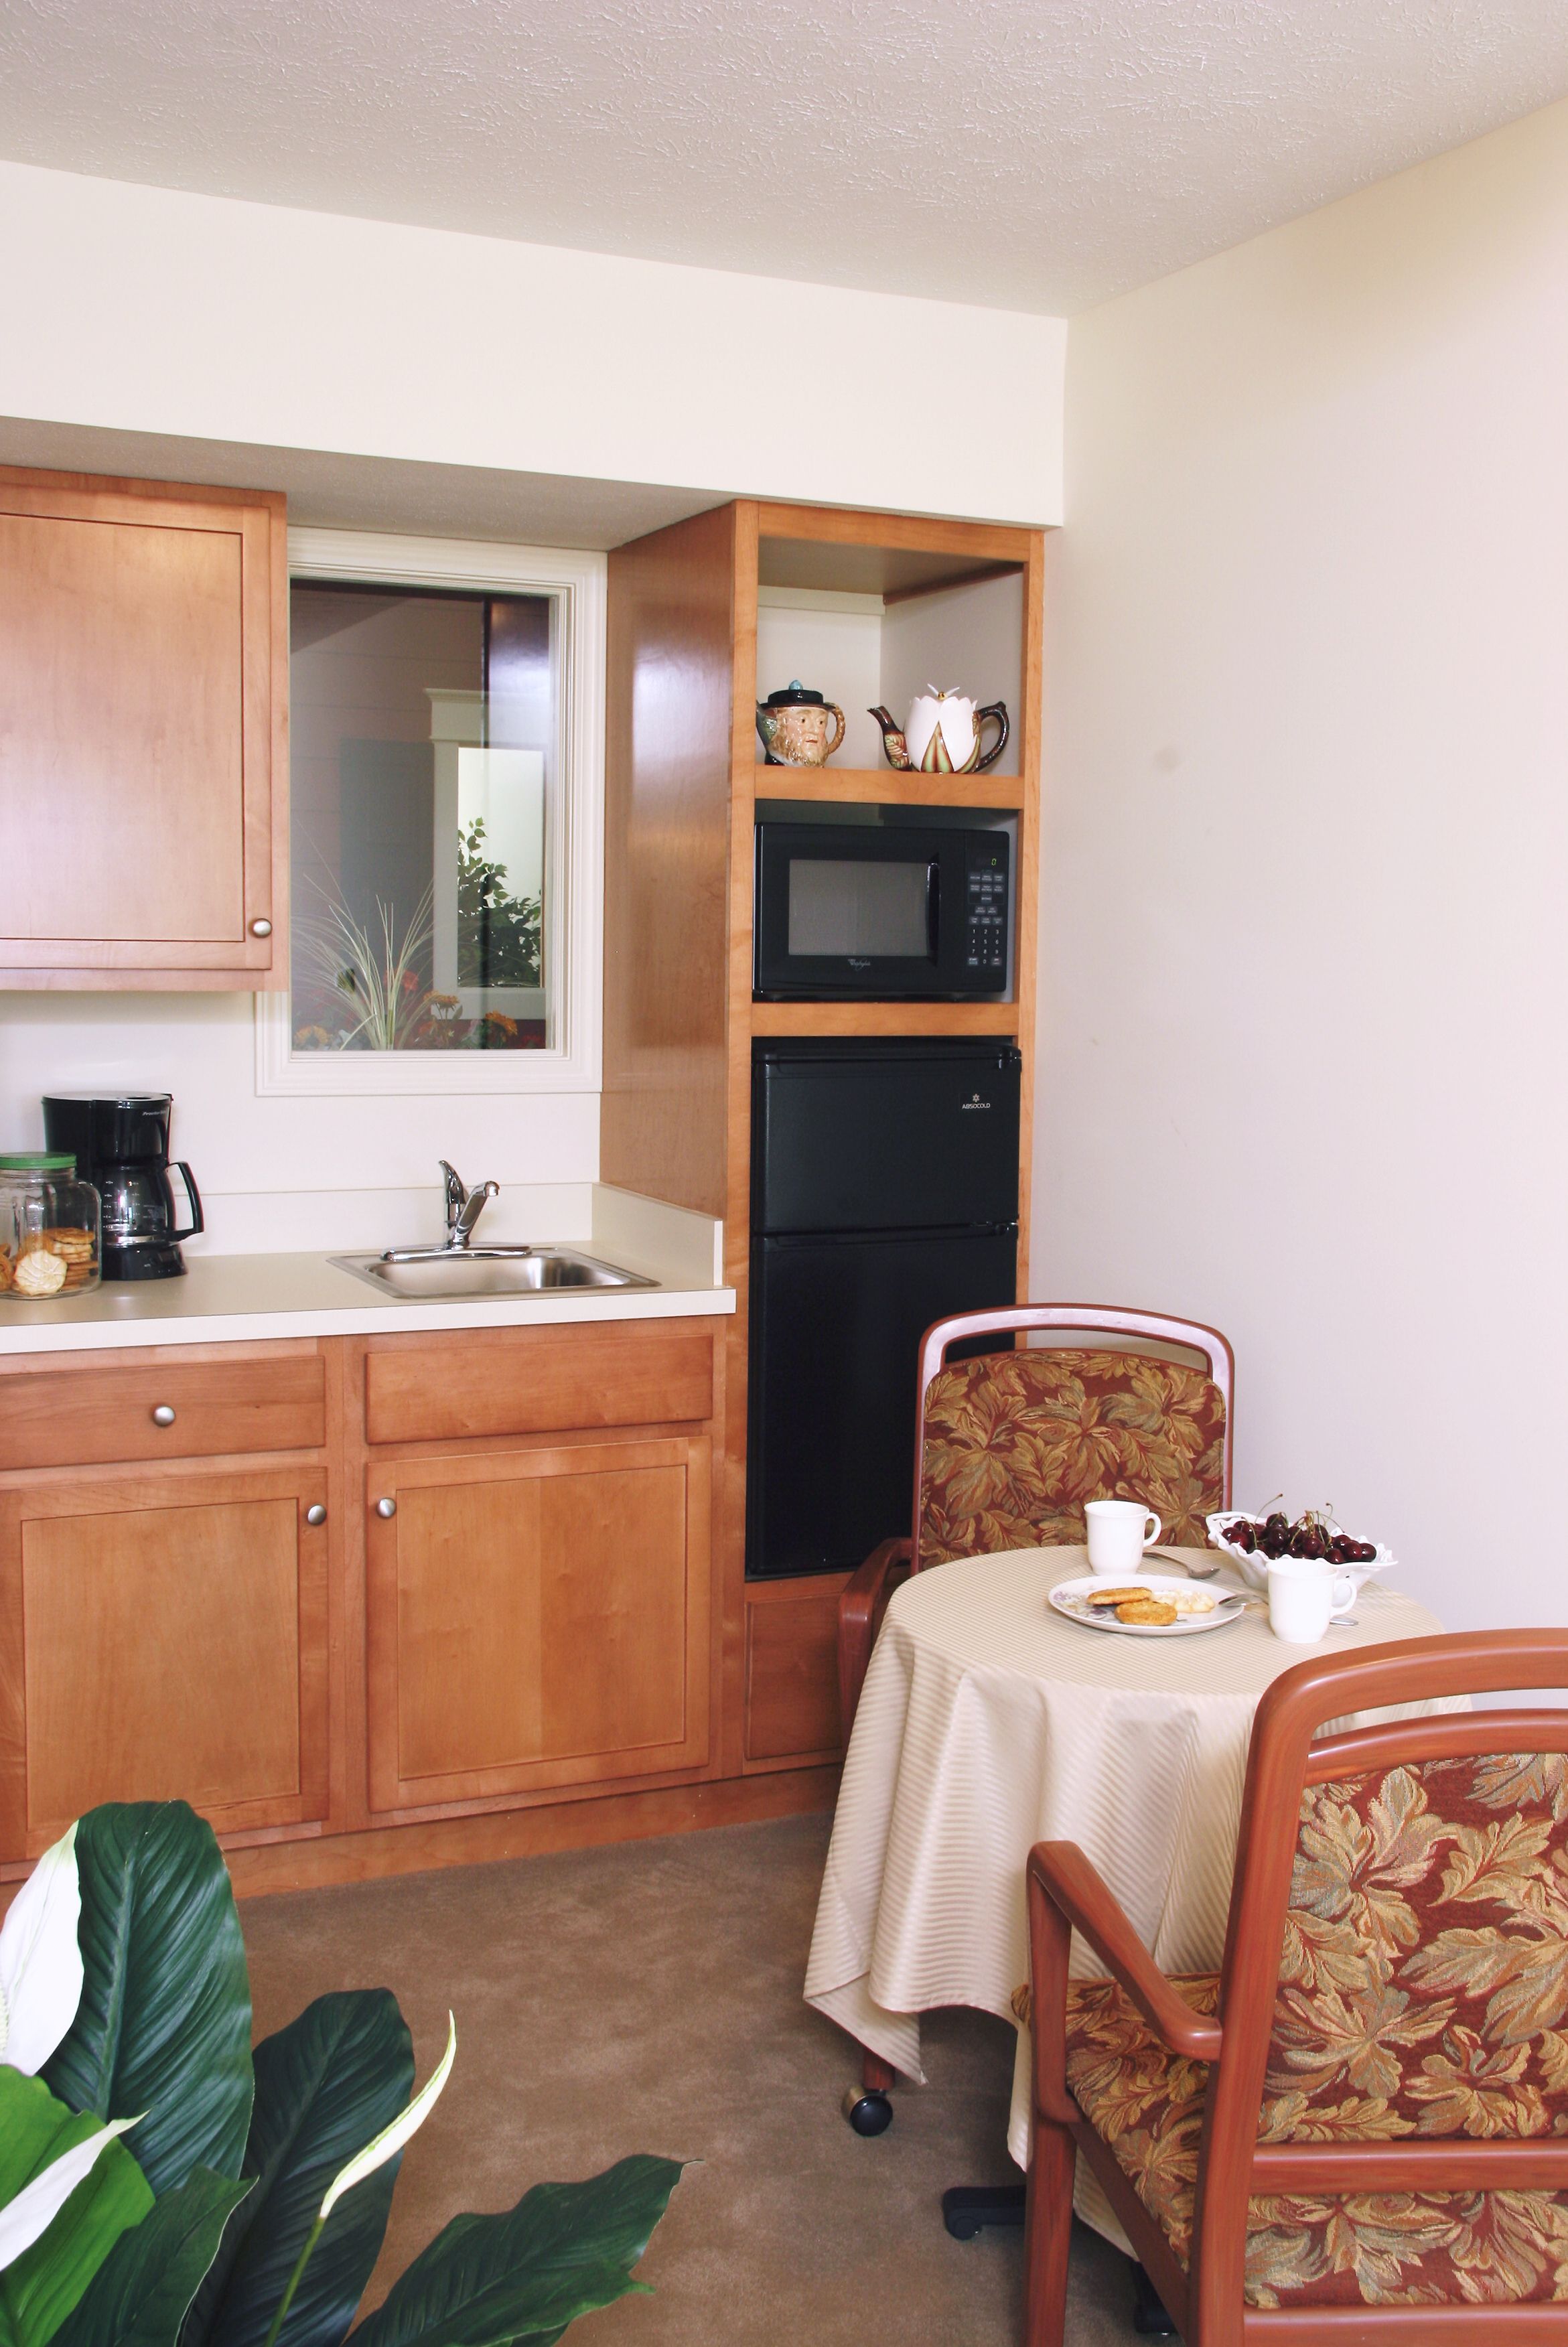 Interior view of Chestnut Fields Retirement Community featuring a well-designed kitchen and dining area.